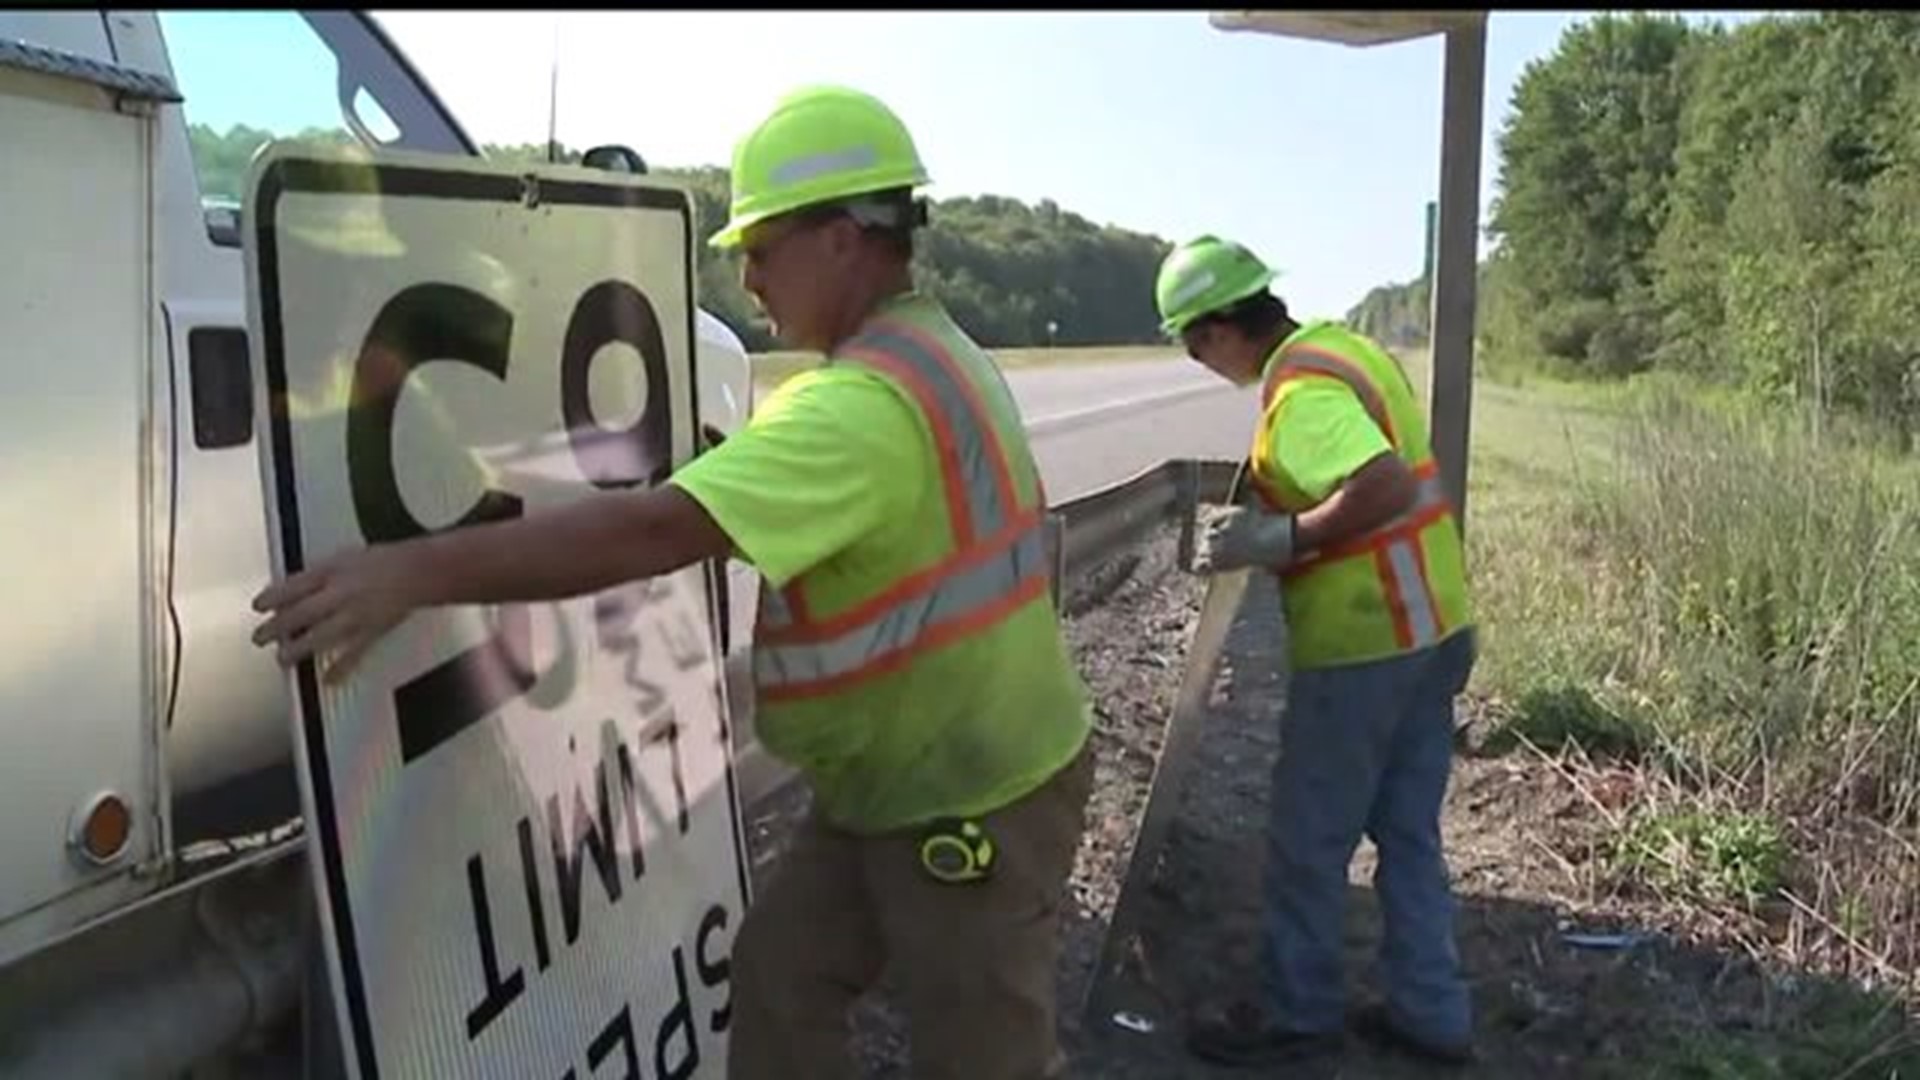 Pennsylvania Turnpike and PennDOT announce 70 mph speed limit expansion